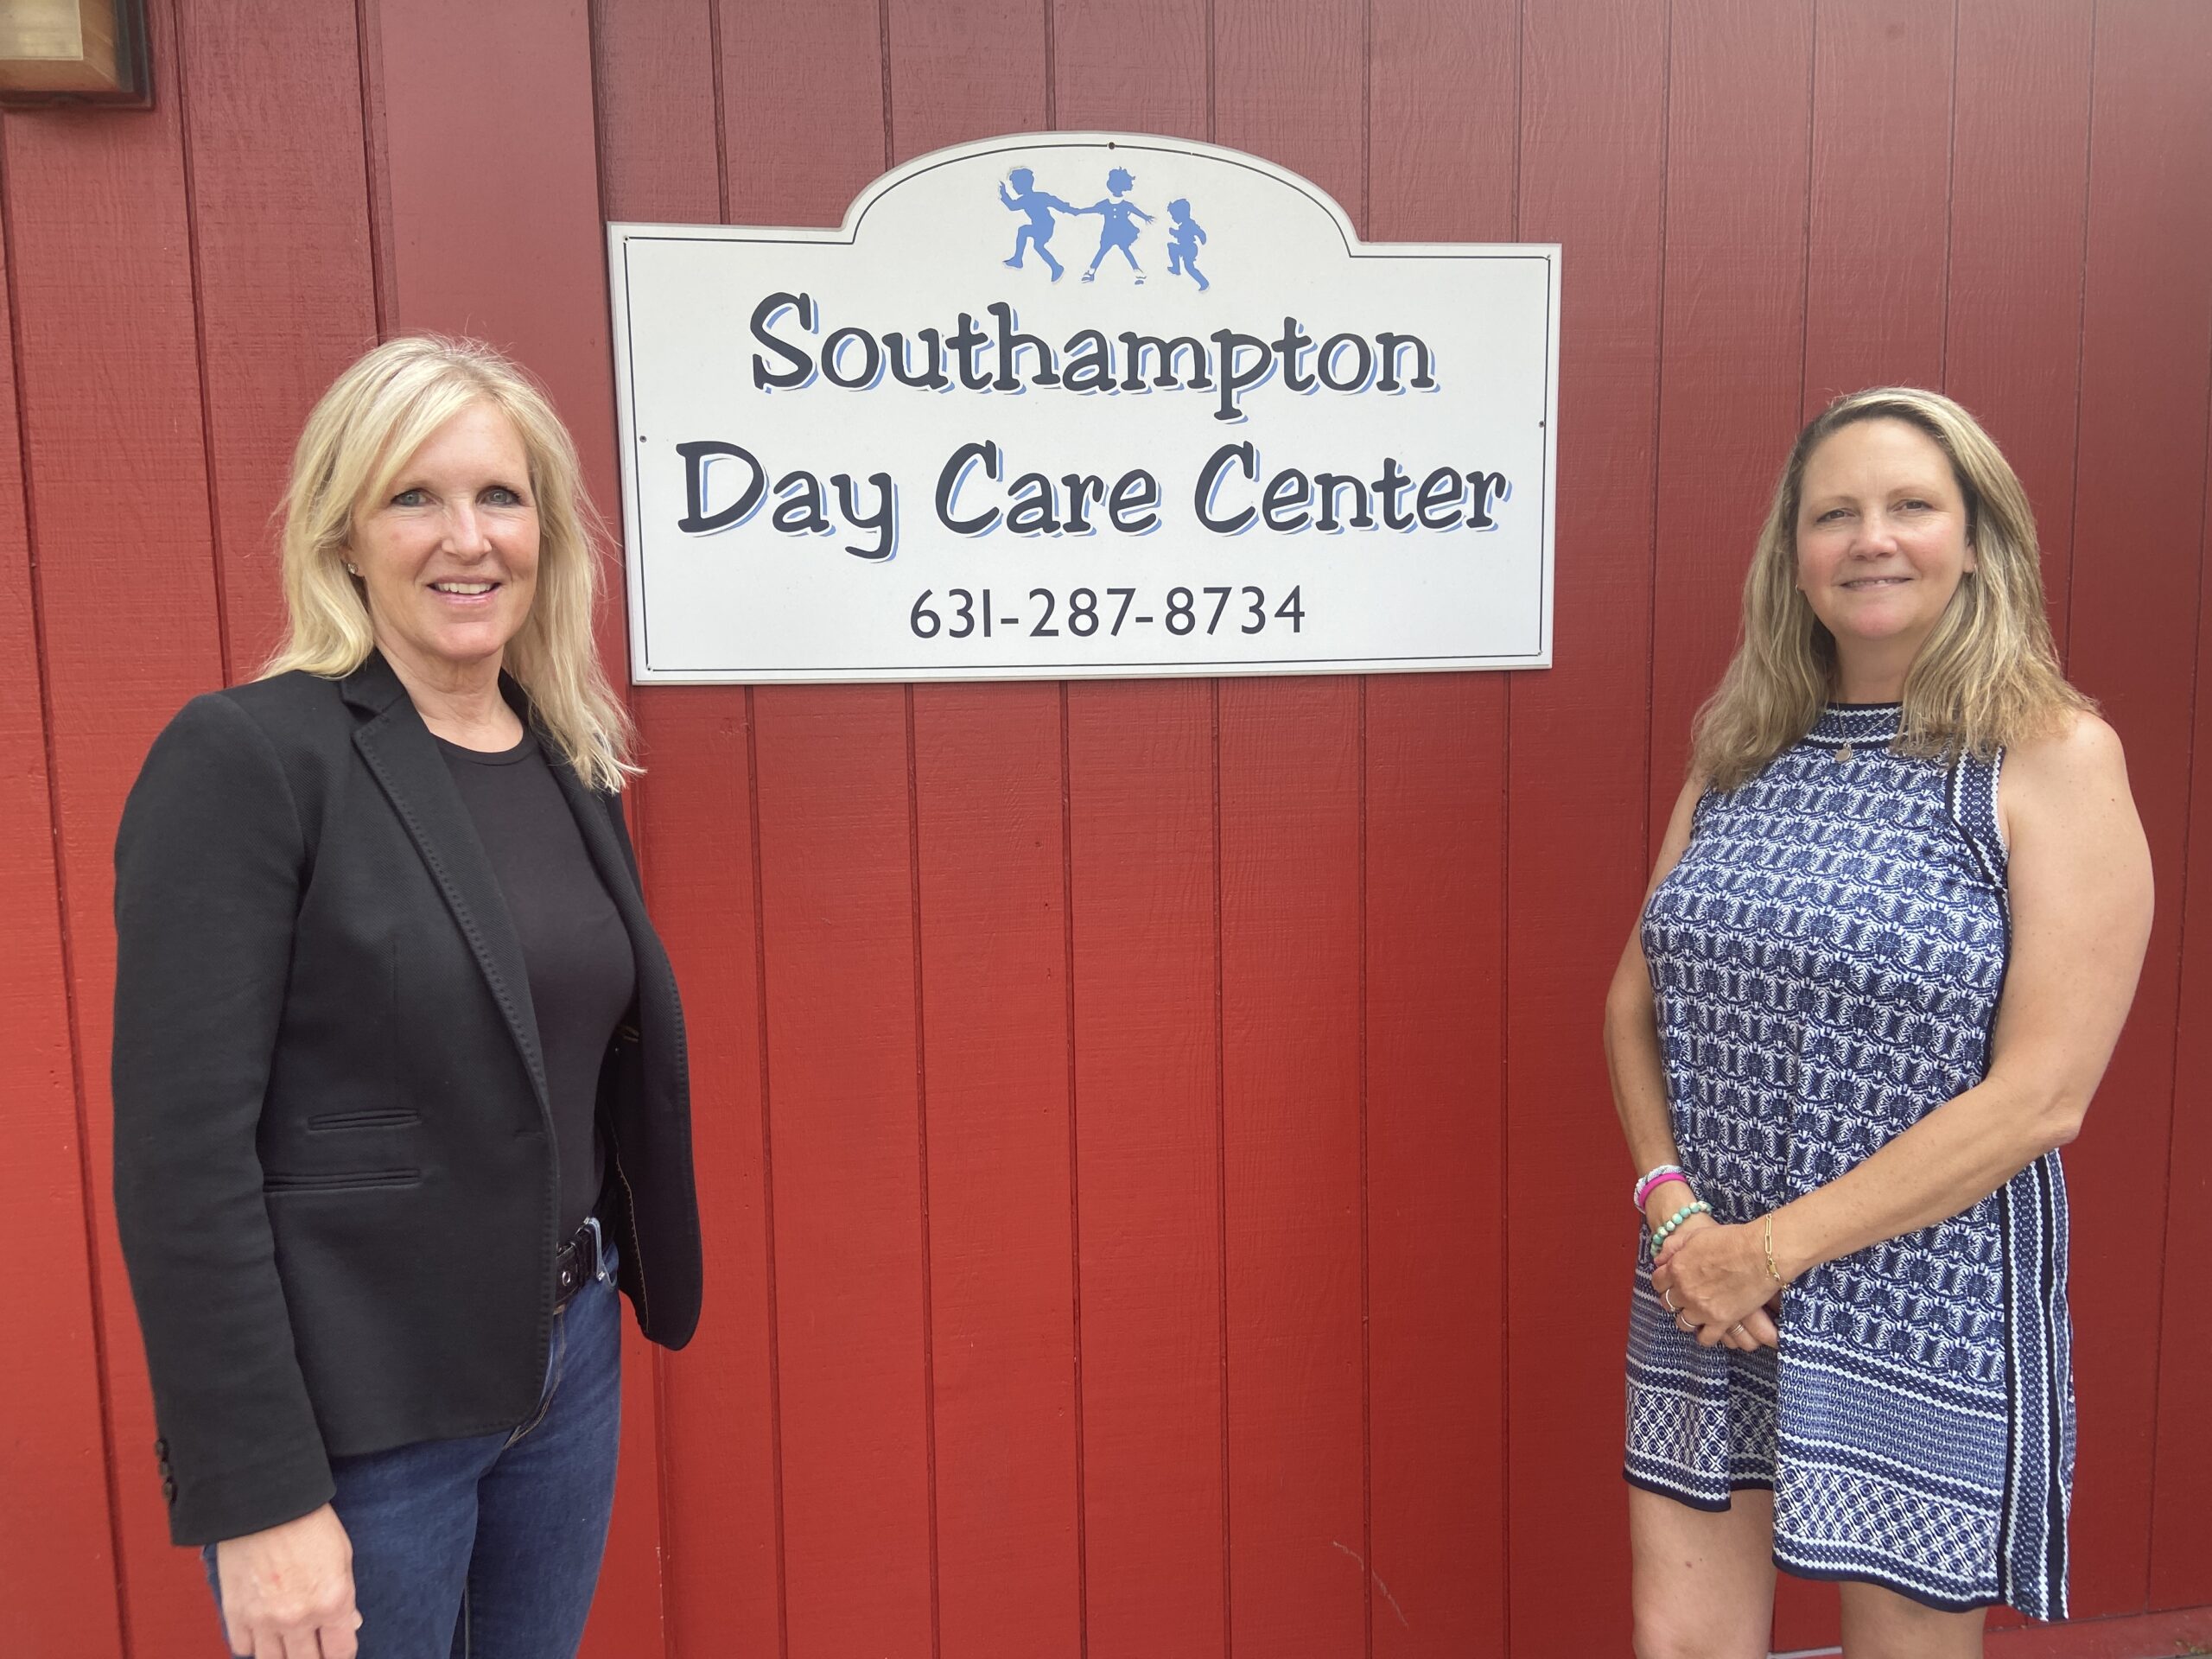 BY JULIA HEMING Southampton Day Care Center board president Susan Hovdesven (left) and director Rachel Copt (right) at the day care.